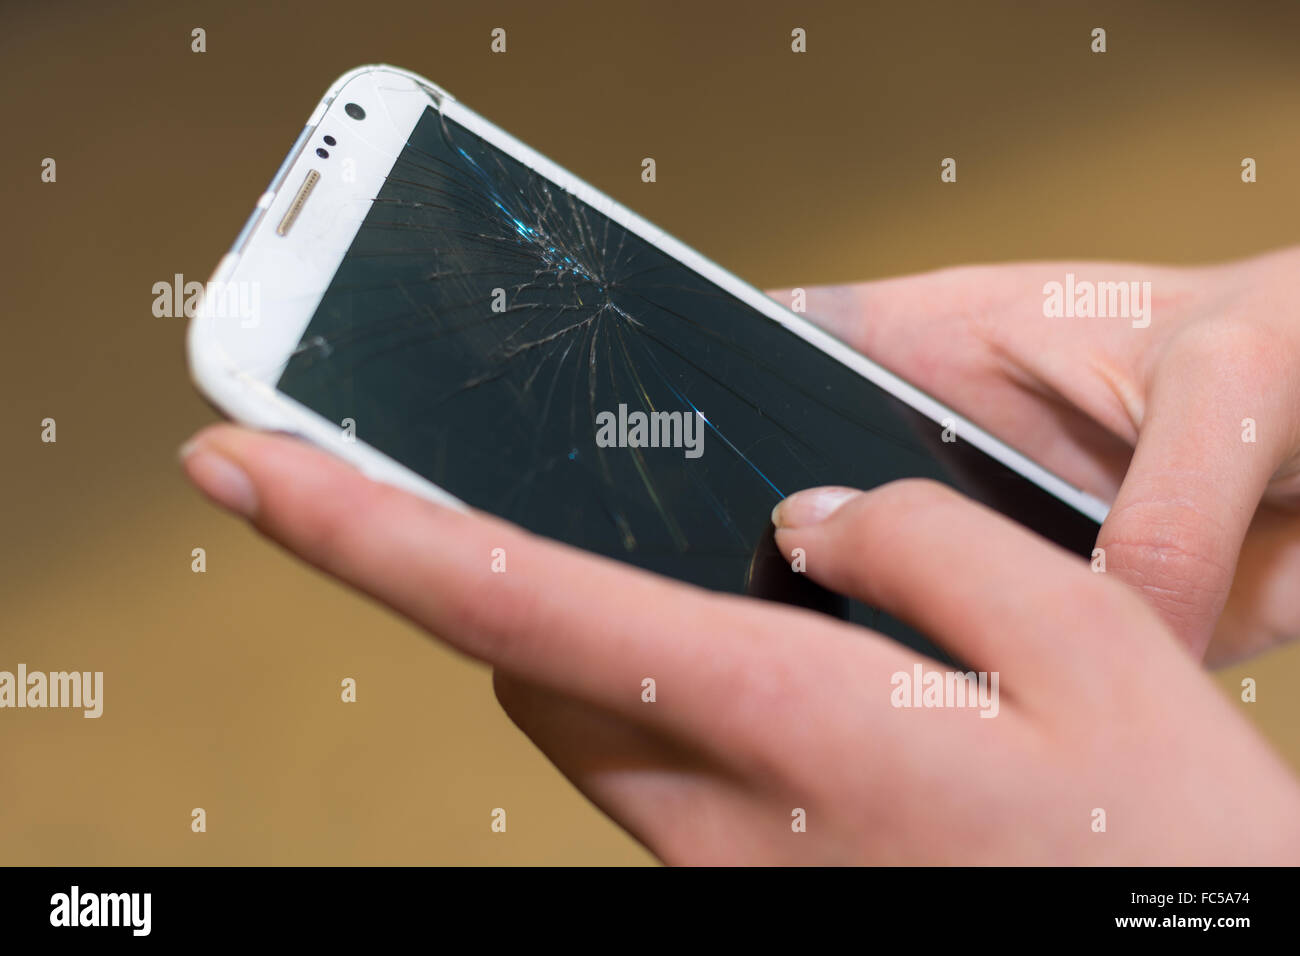 Smartphone with a broken display Stock Photo